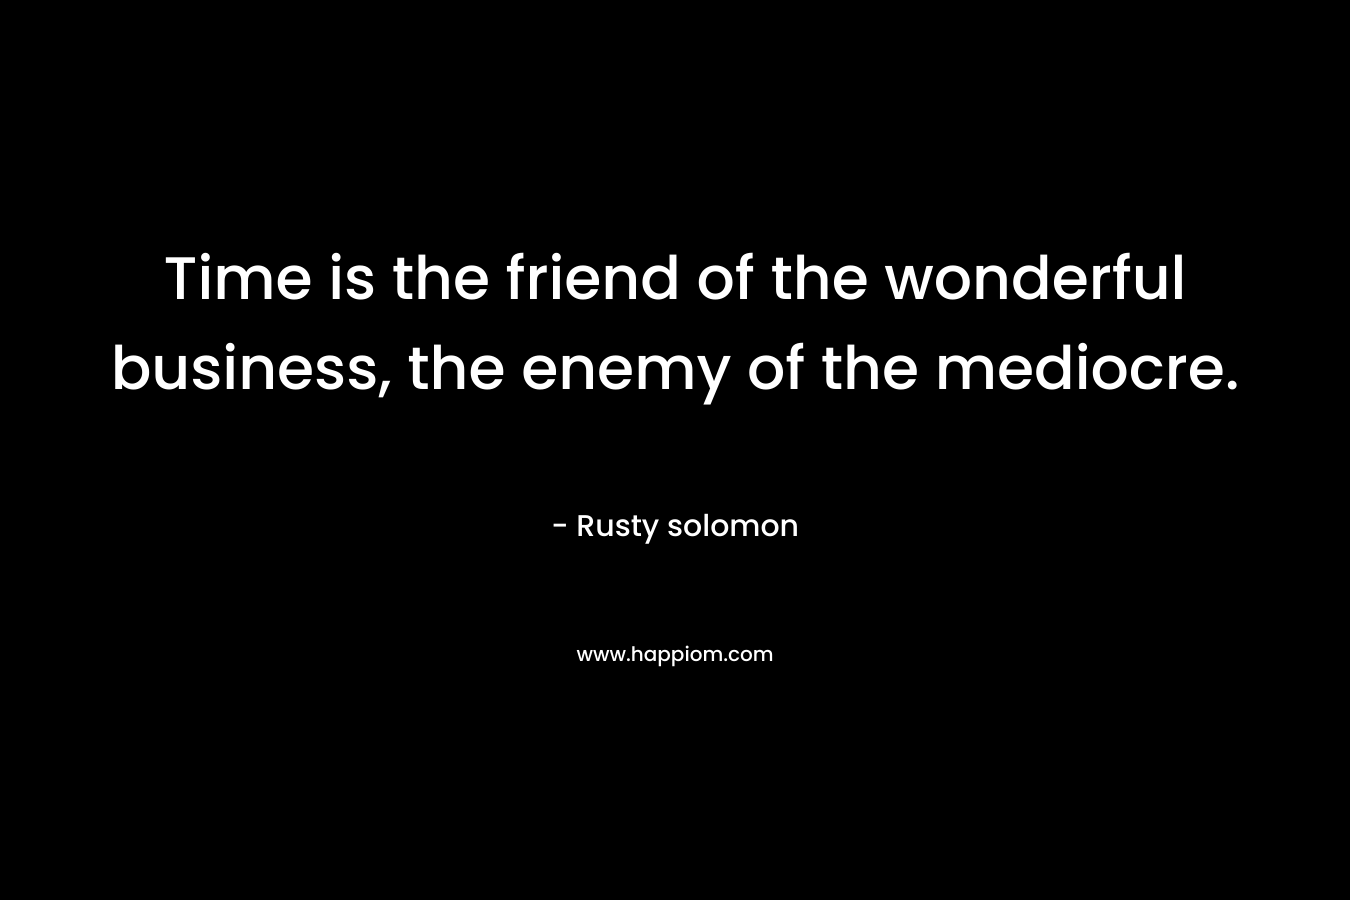 Time is the friend of the wonderful business, the enemy of the mediocre.